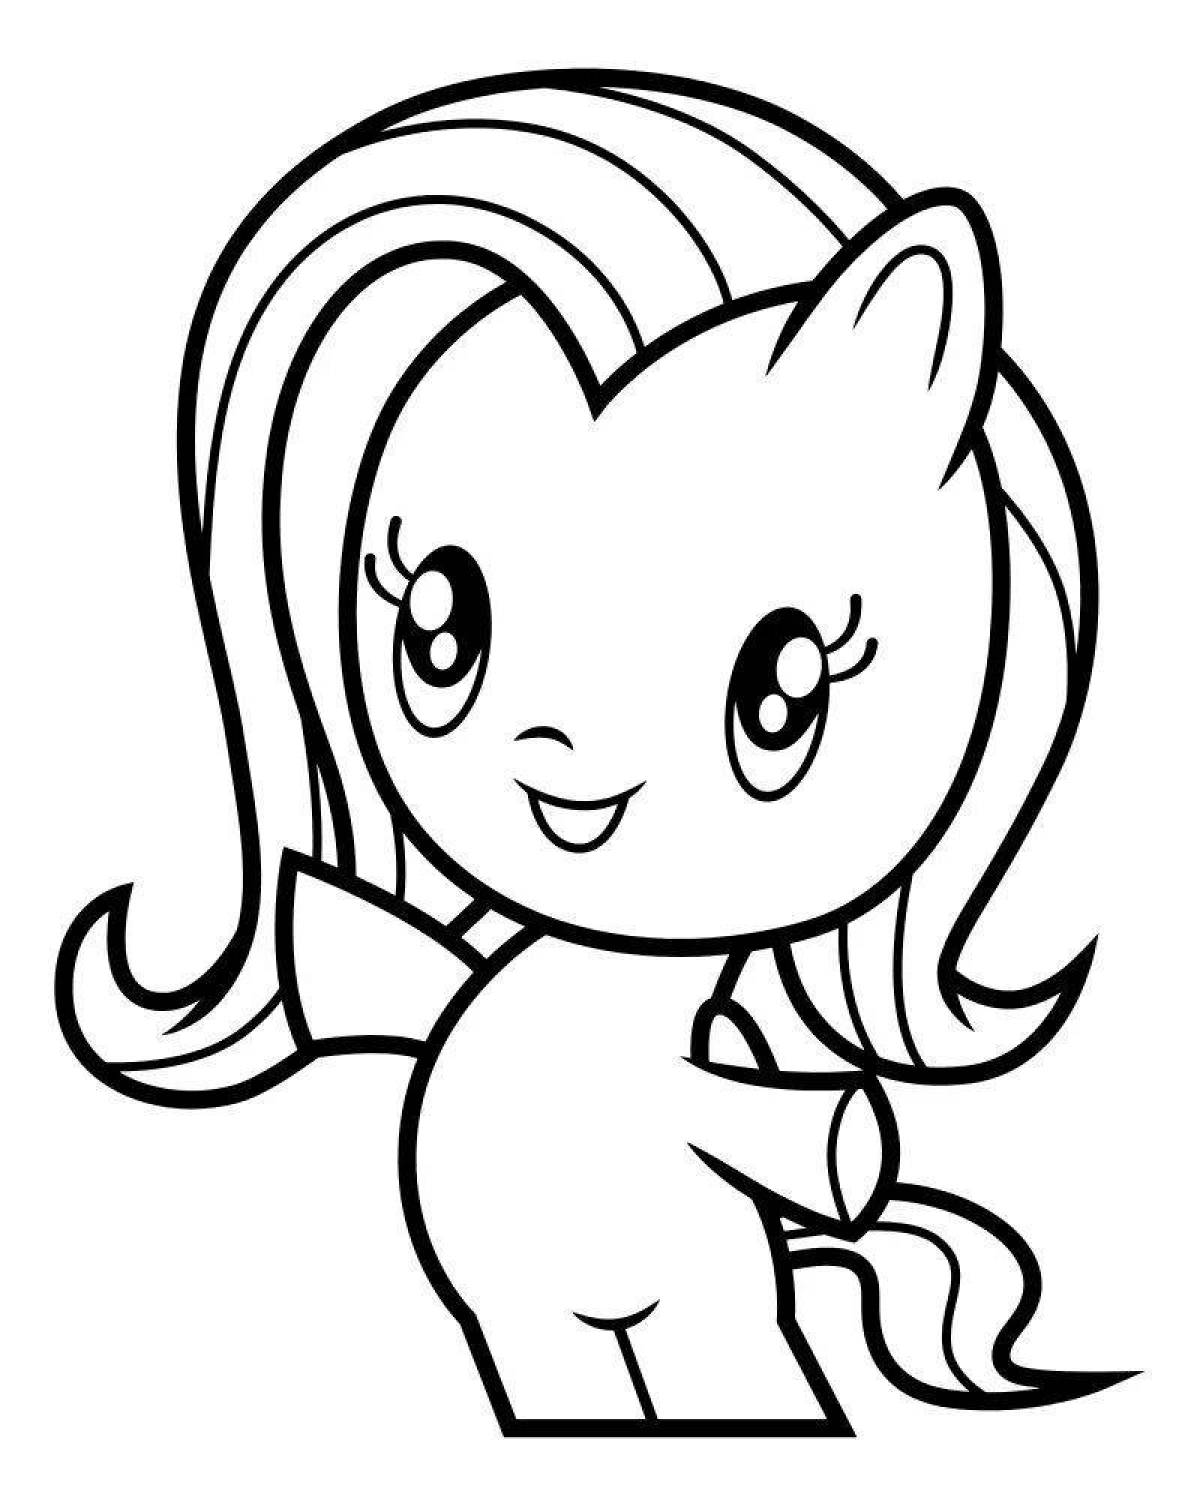 Charming pony cuties coloring book for girls